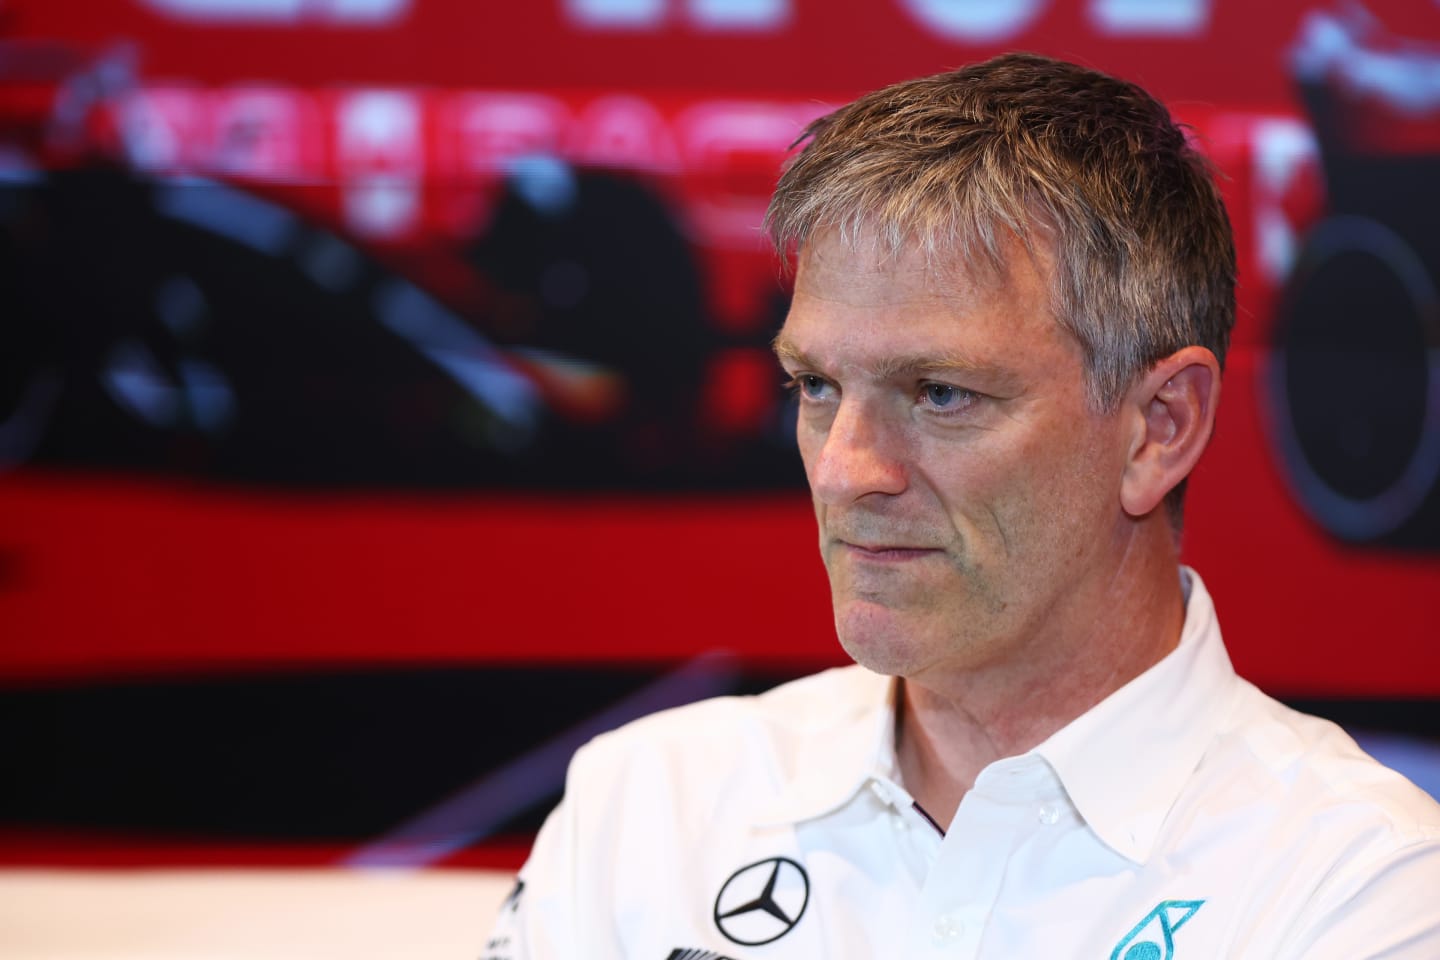 MONTREAL, QUEBEC - JUNE 16: James Allison, Technical Director at Mercedes GP attends the Team Principals Press Conference during practice ahead of the F1 Grand Prix of Canada at Circuit Gilles Villeneuve on June 16, 2023 in Montreal, Quebec. (Photo by Dan Istitene/Getty Images)